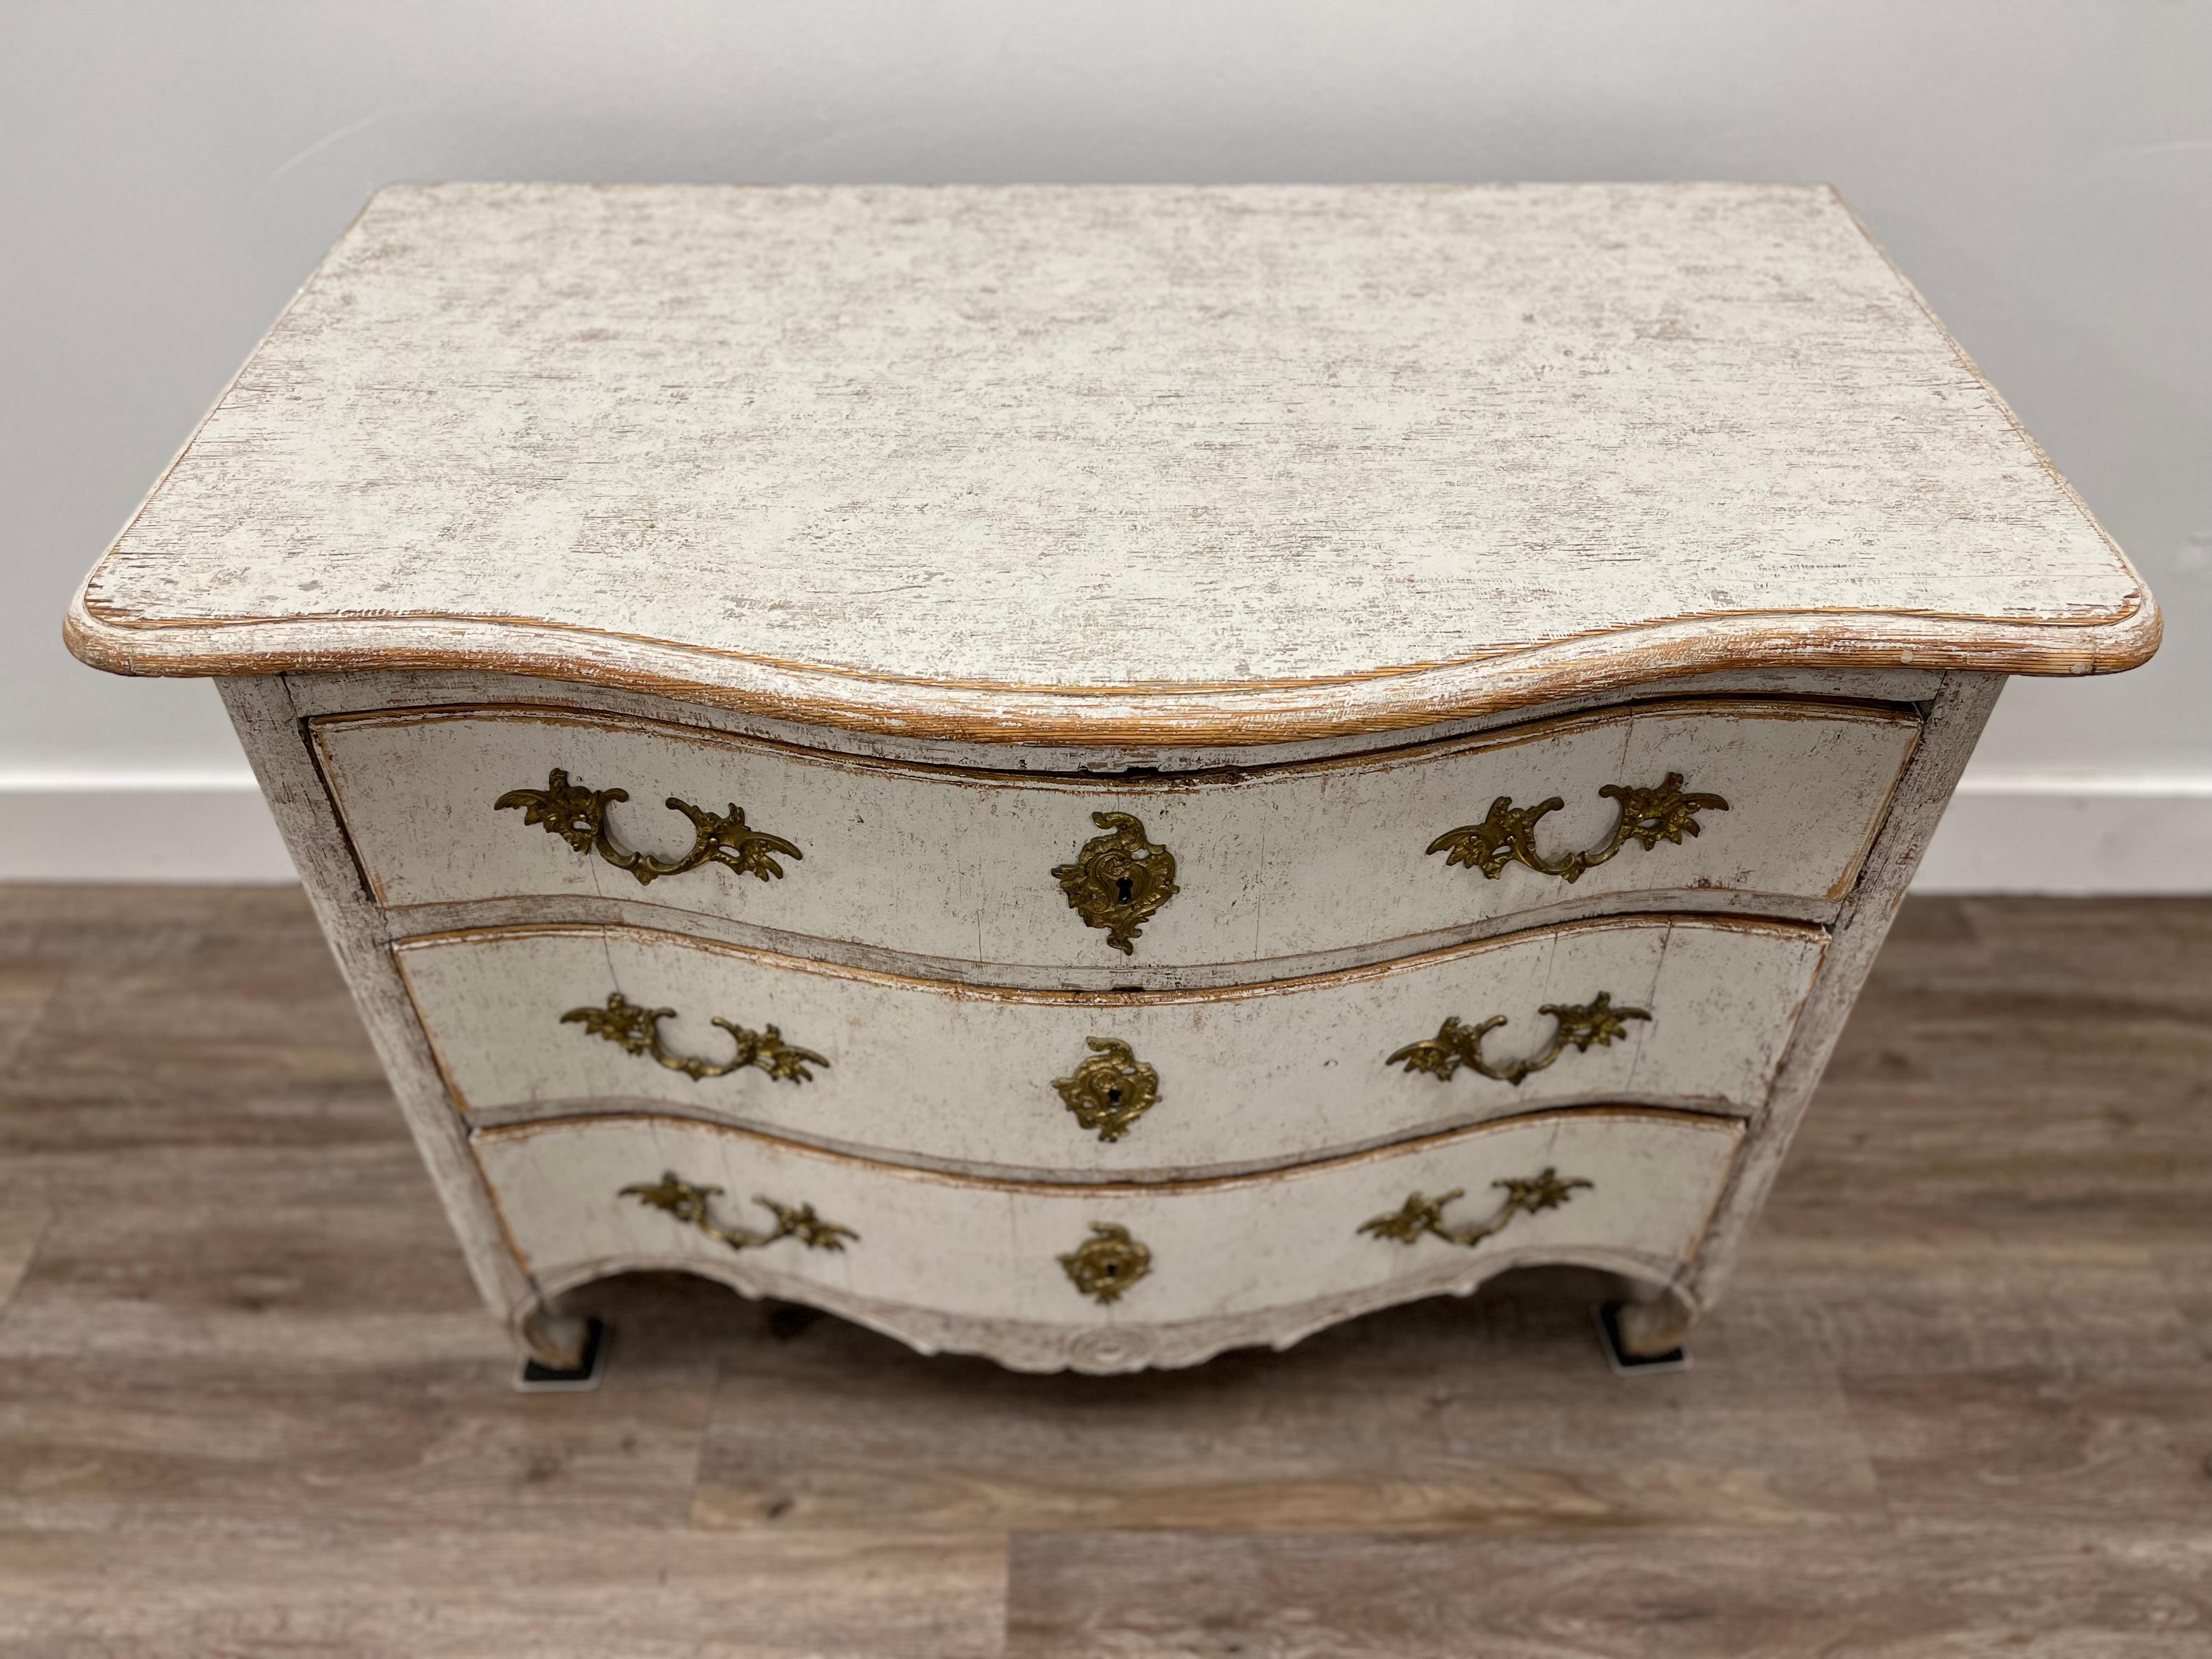 A Swedish Rococo commode with a slide-out tray over three bow front drawers. Decoratively carved apron. Repainted in soft grey with original locks and old (but not original) brass hardware. Original freight goods label on the back.